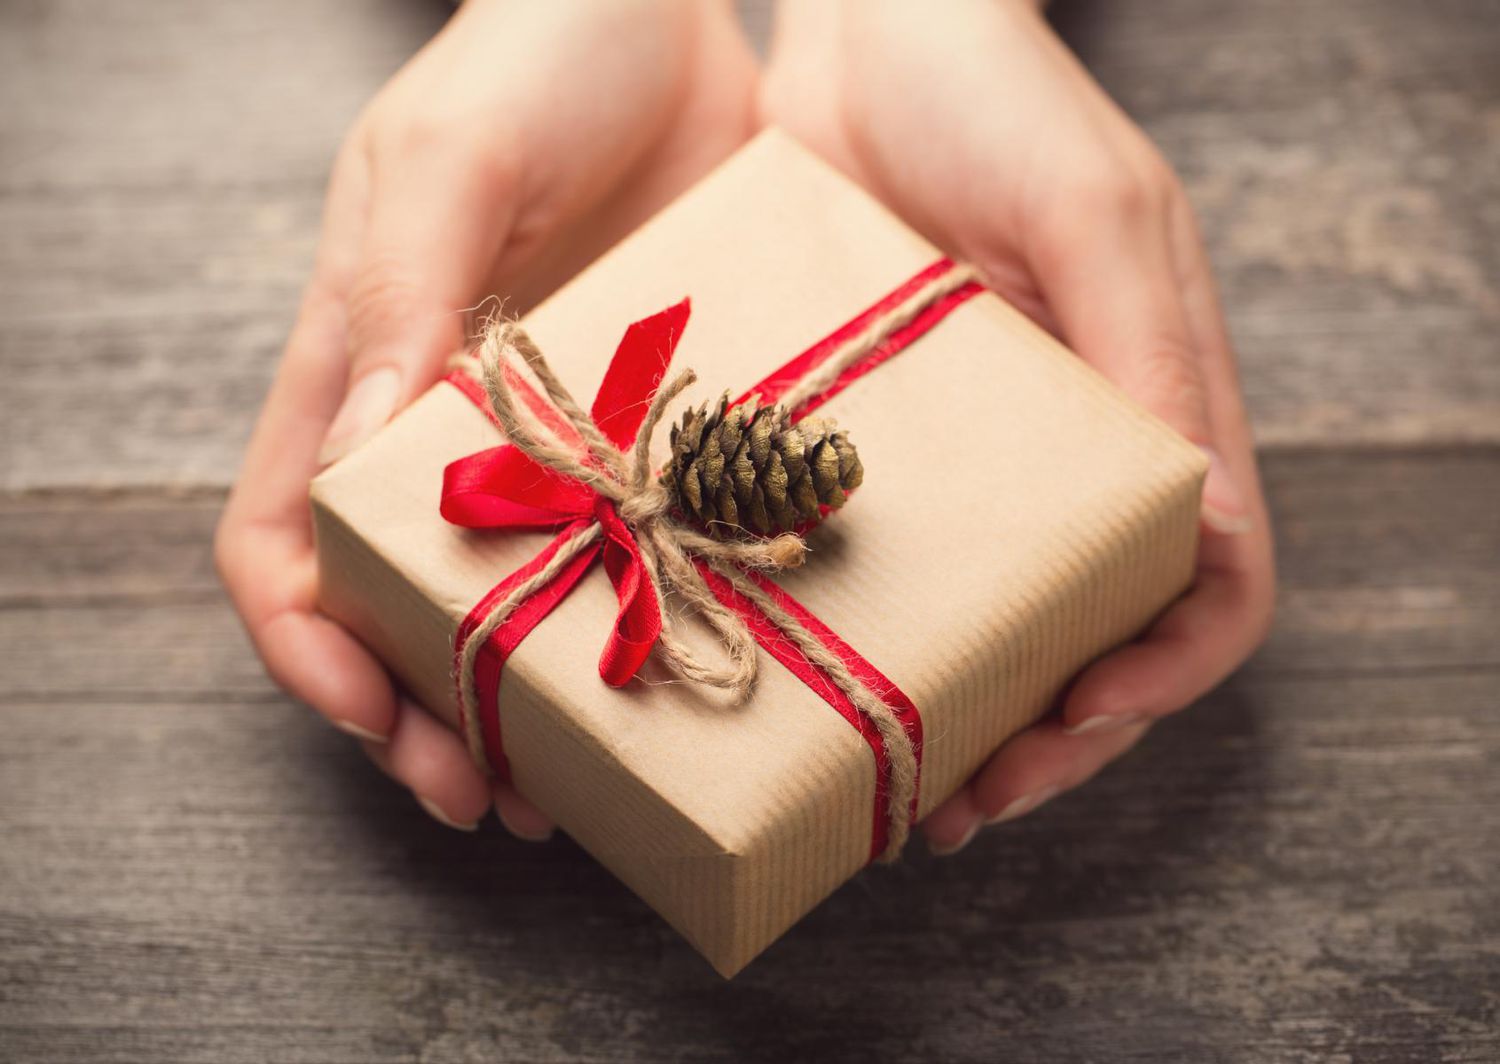 Woman's hands holding a Christmas gift